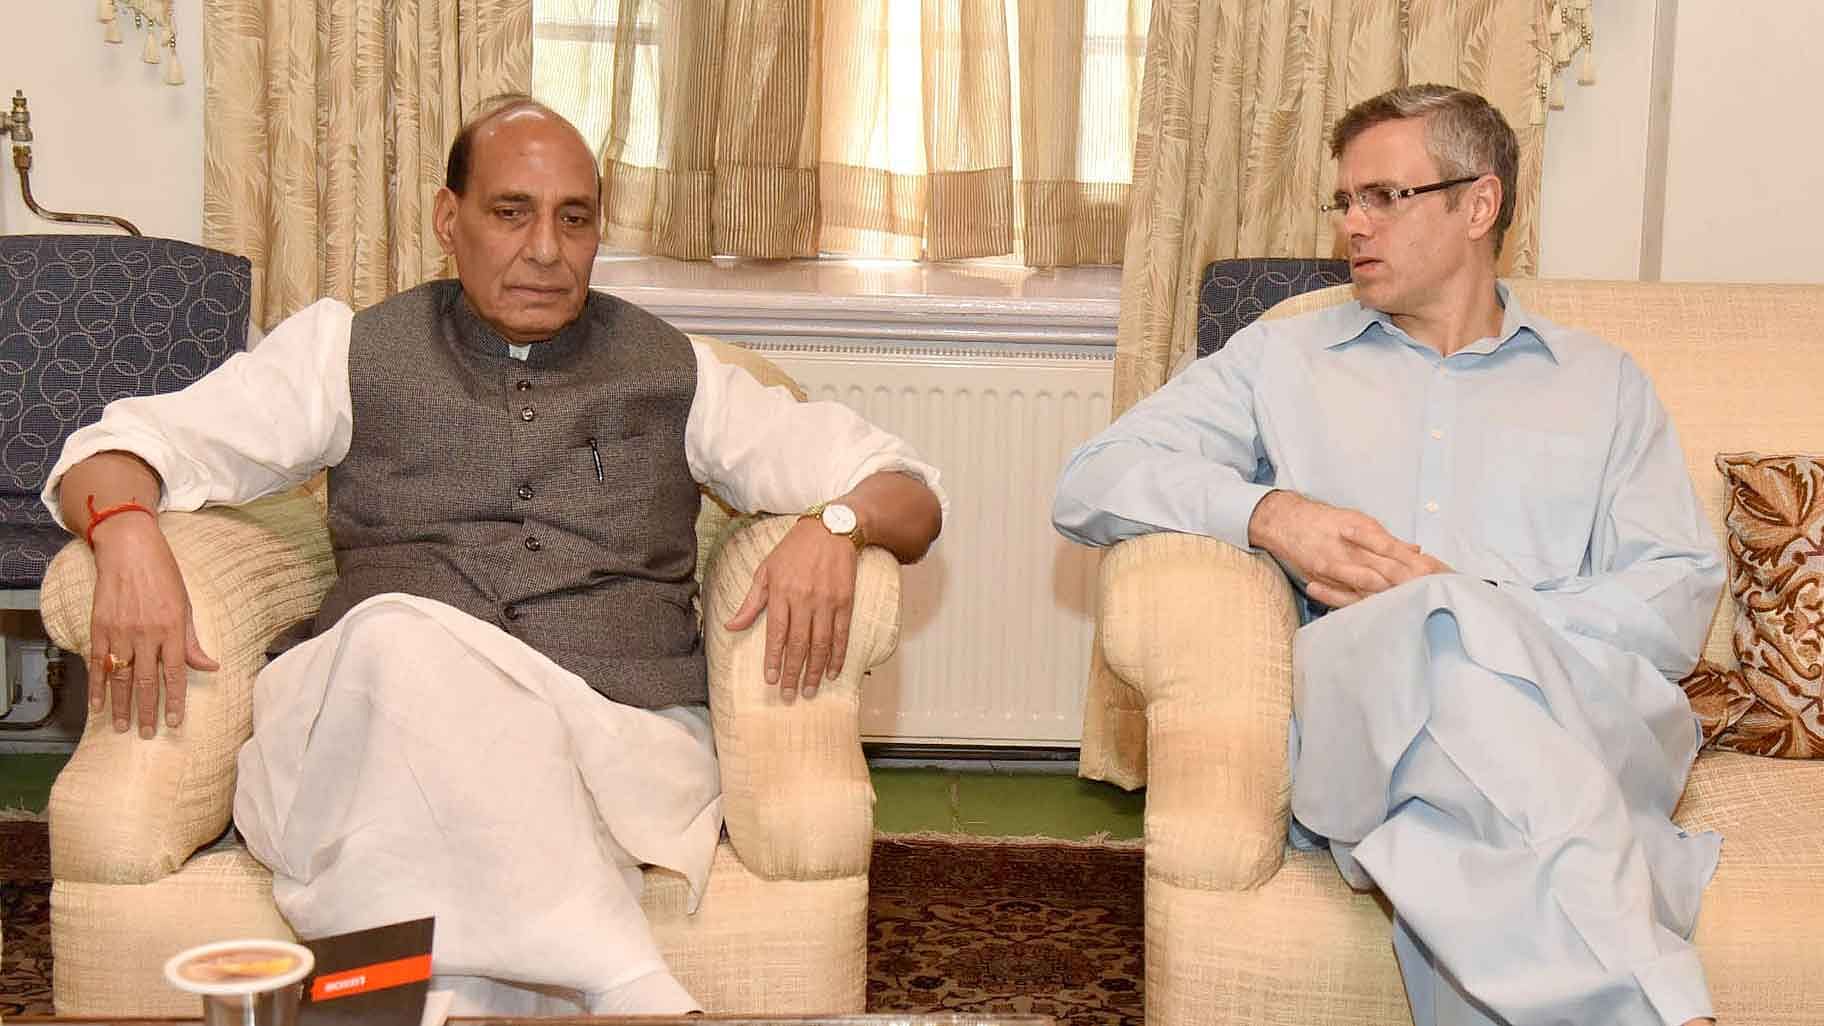 File picture of former Jammu and Kashmir chief minister Omar Abdullah with Union Home Minister Rajnath Singh in Srinagar. (Photo: IANS)